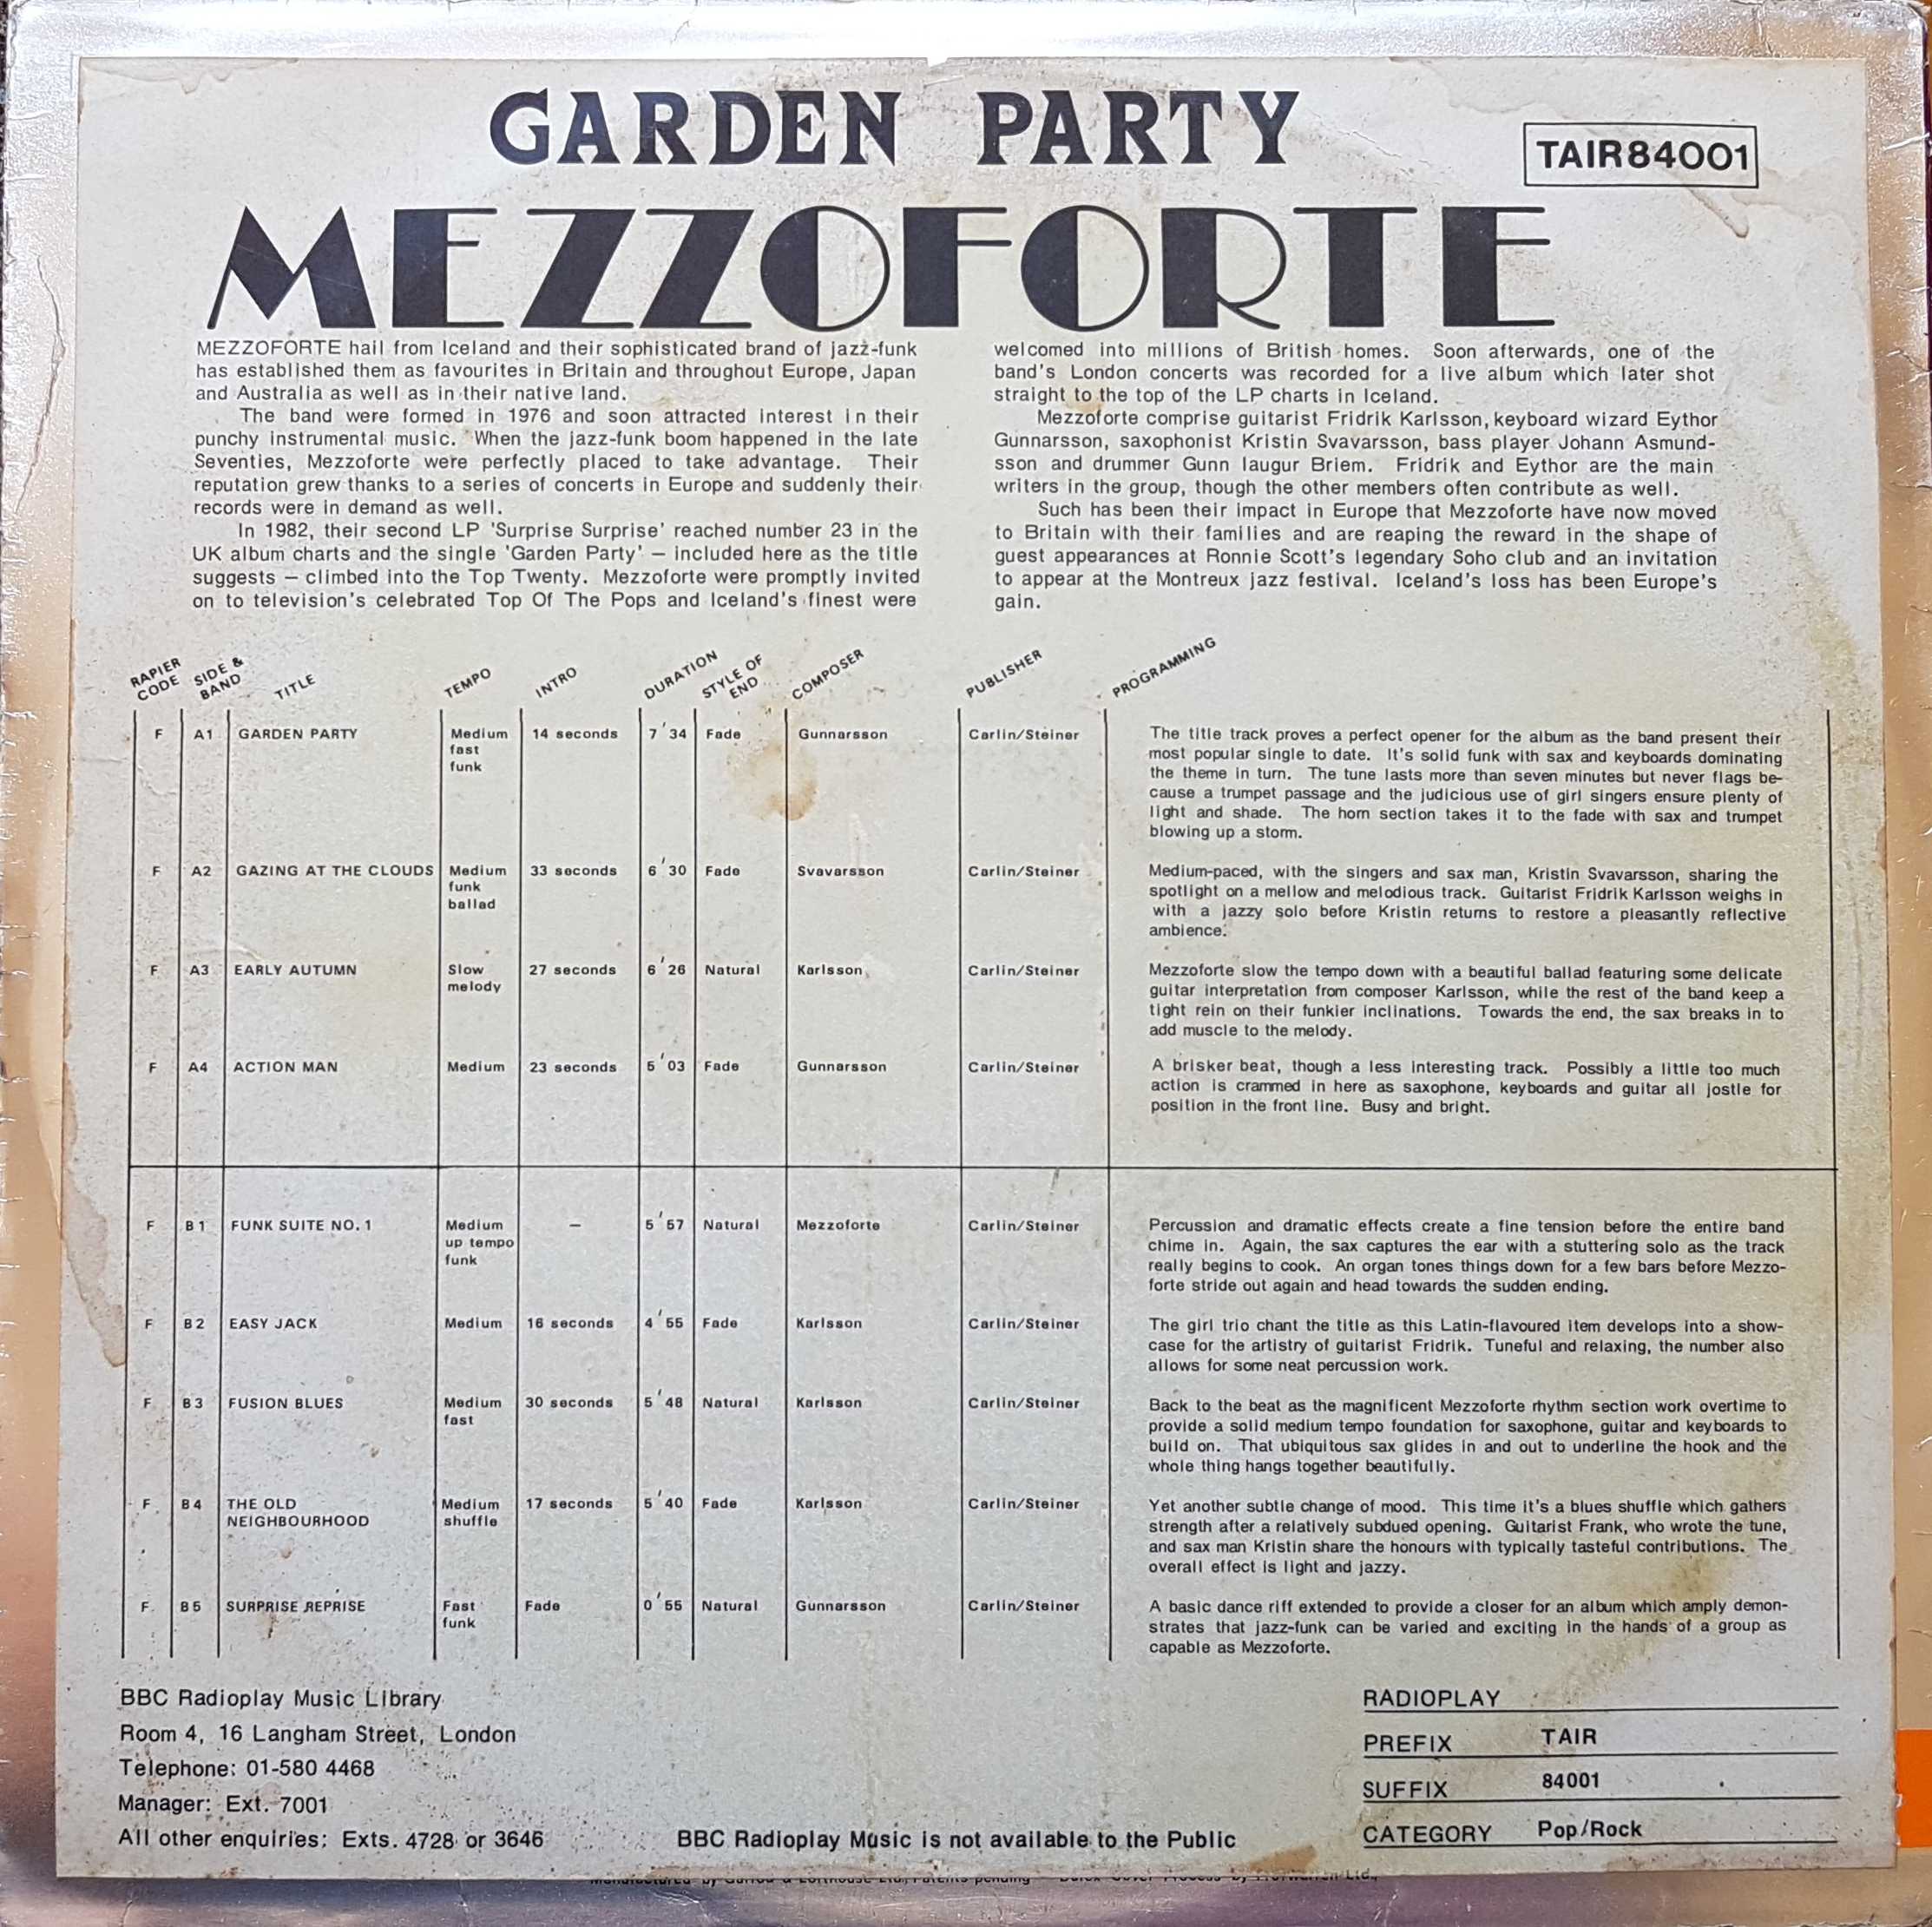 Picture of TAIR 84001 Garden party by artist Mezzoforth from the BBC records and Tapes library